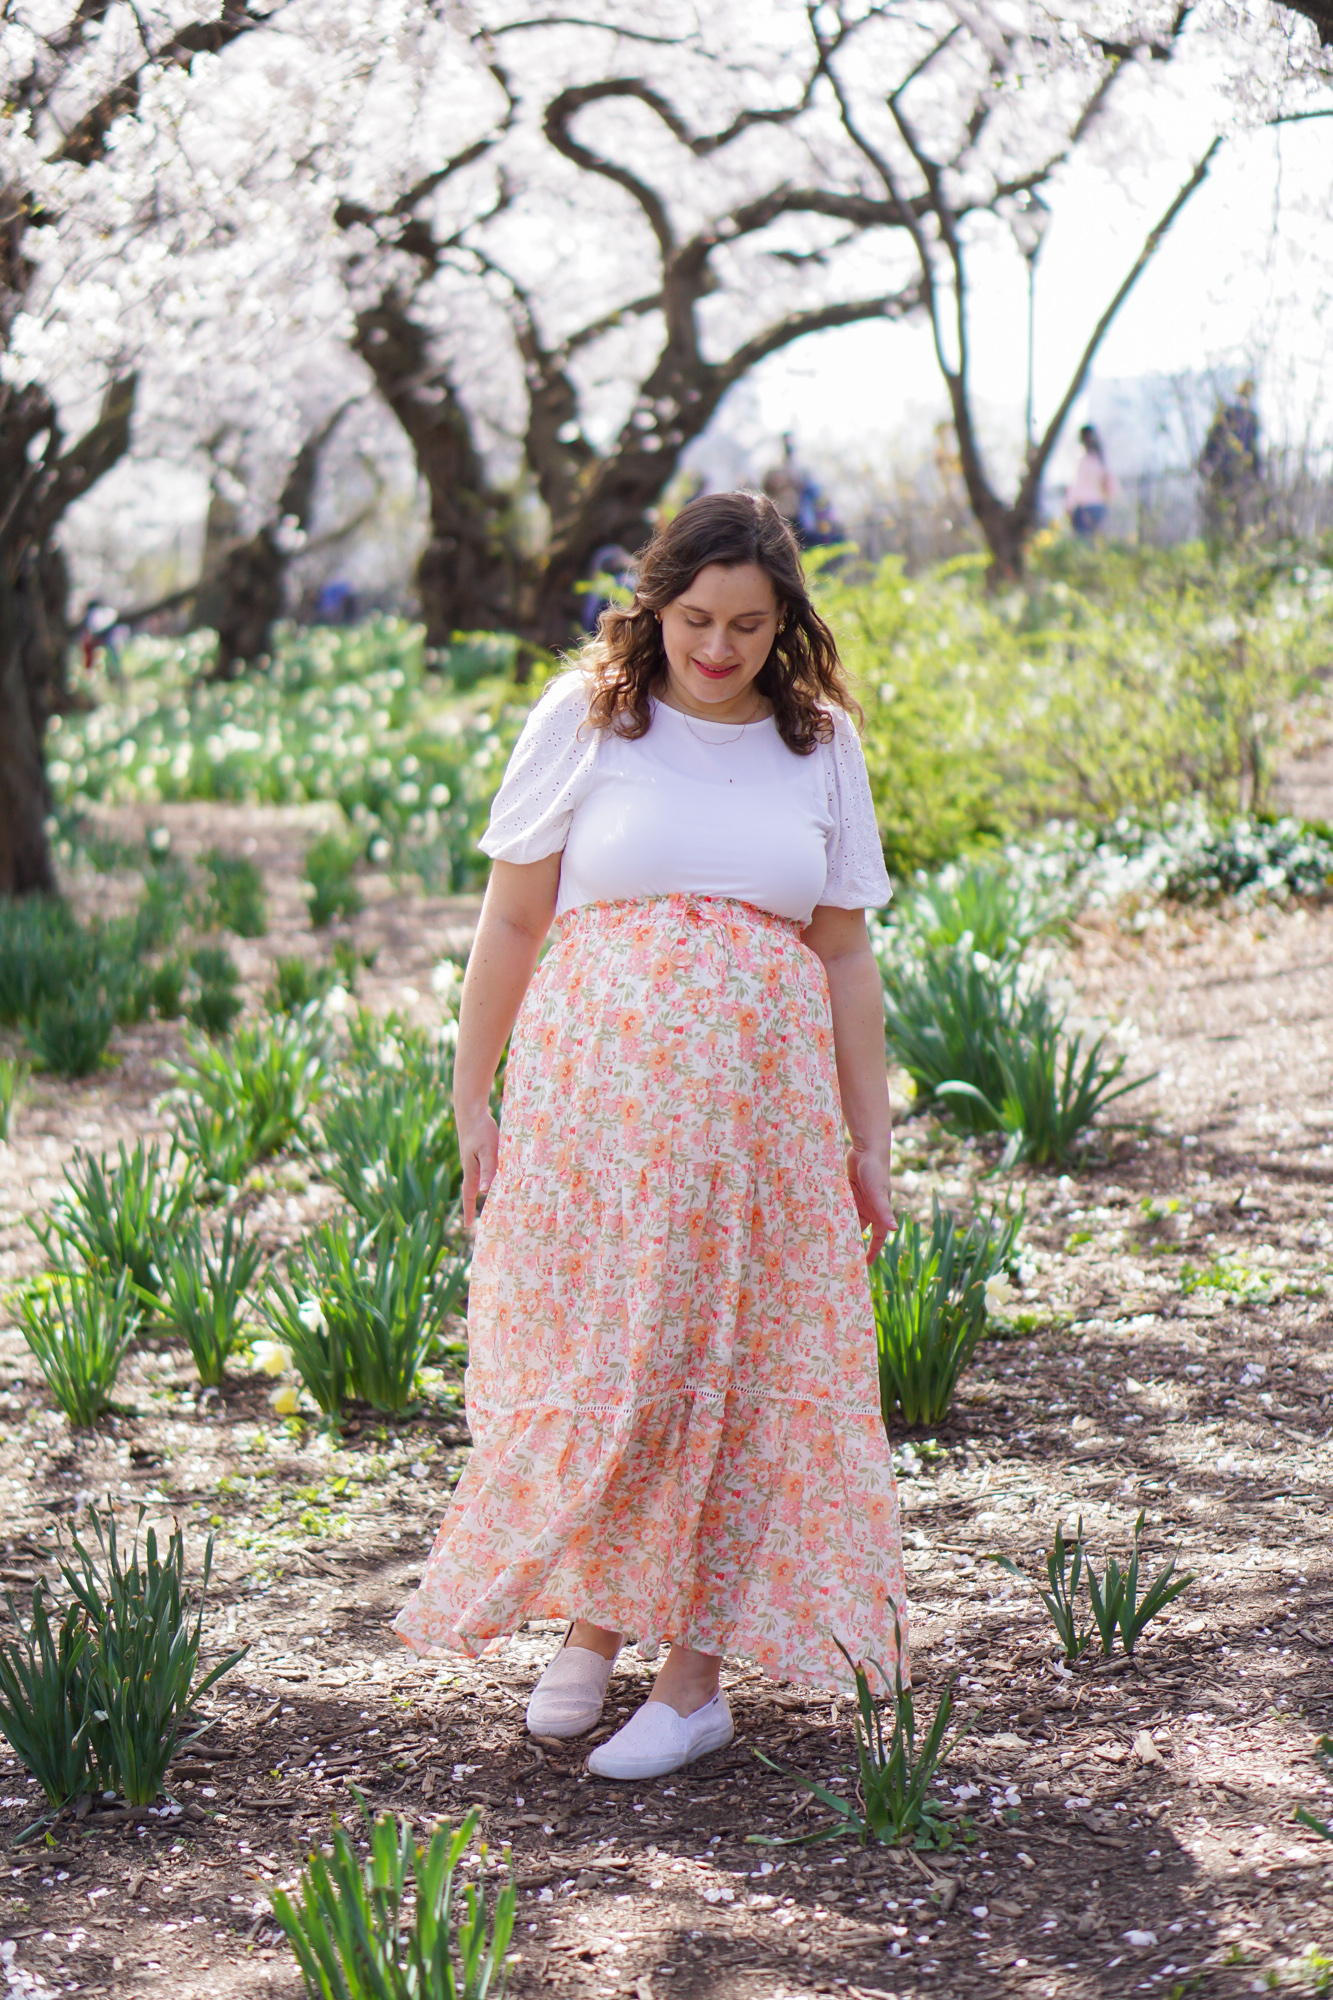 Bump-friendly spring outfits